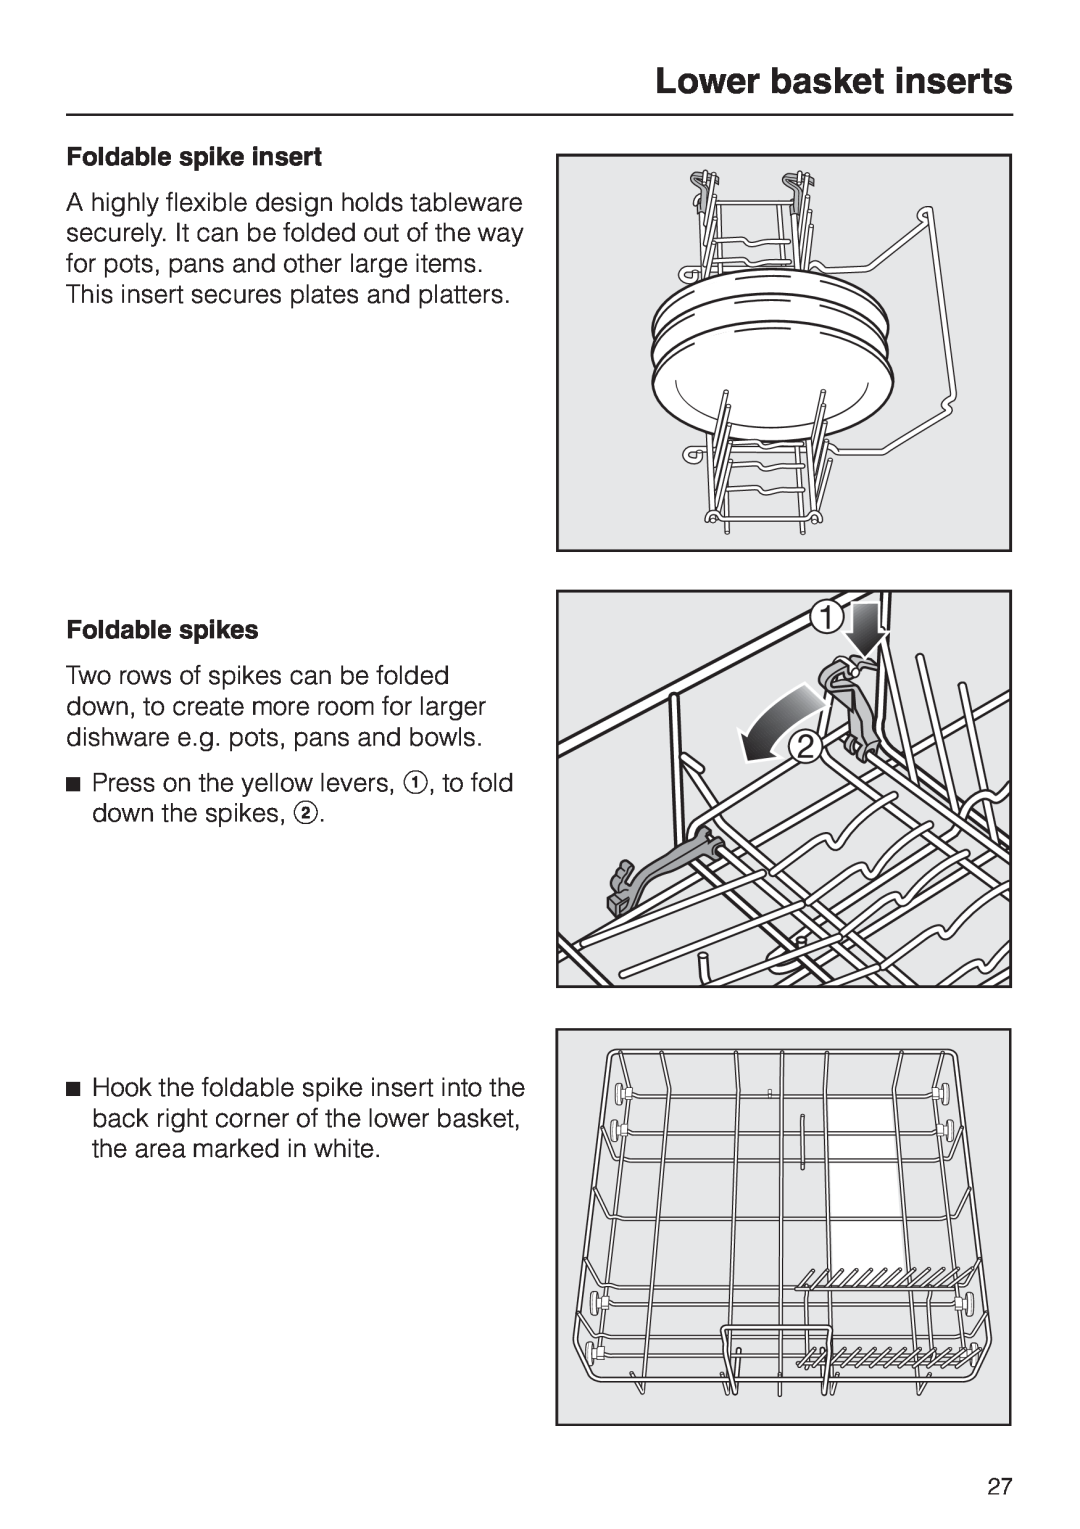 Miele G 856 SC ELITE operating instructions Lower basket inserts, Foldable spike insert, Foldable spikes 